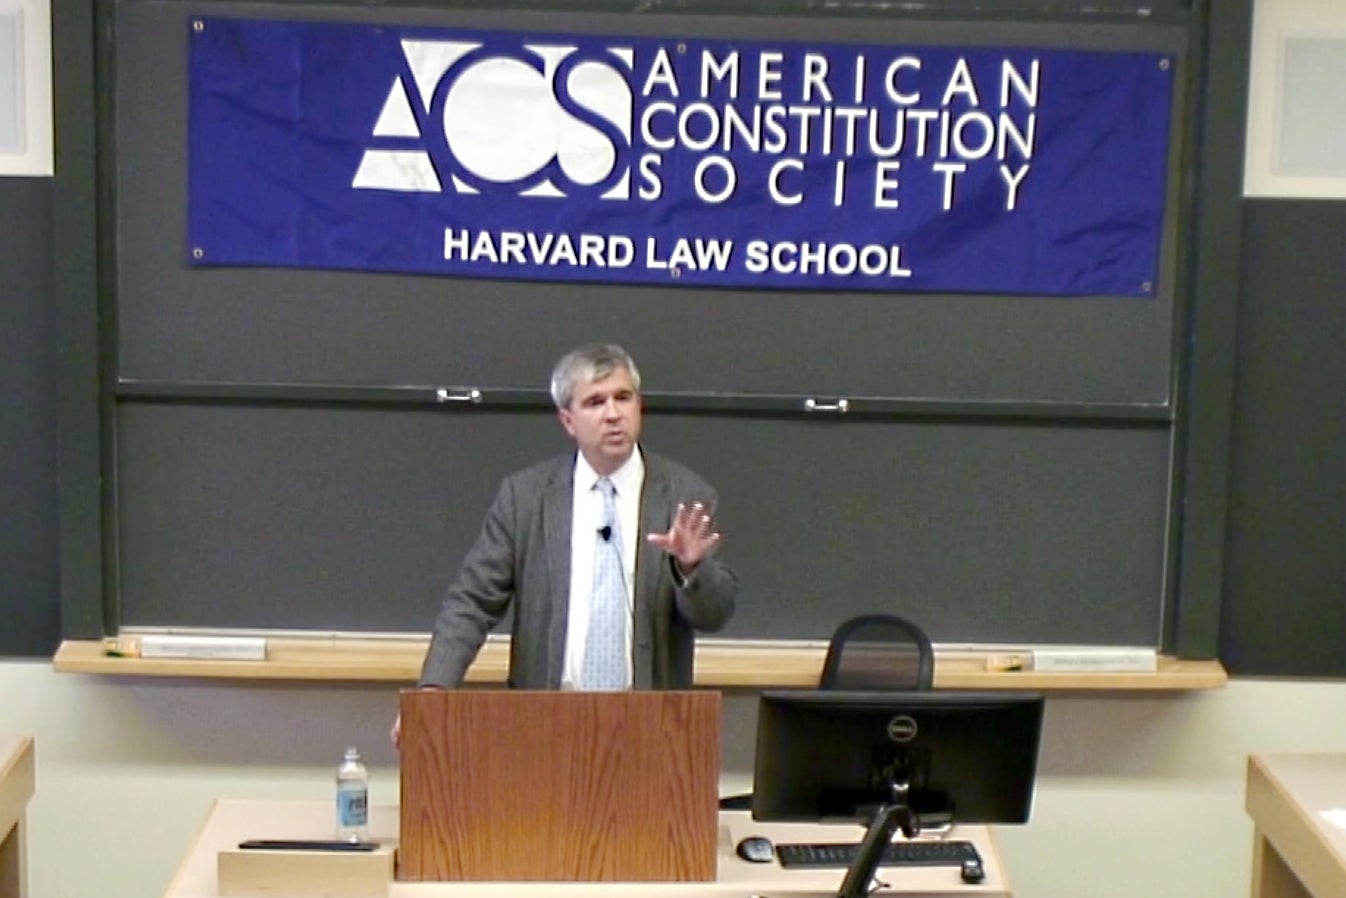 Santiago Legarre speaking at the front of the room with an American Constitution Society banner behind him